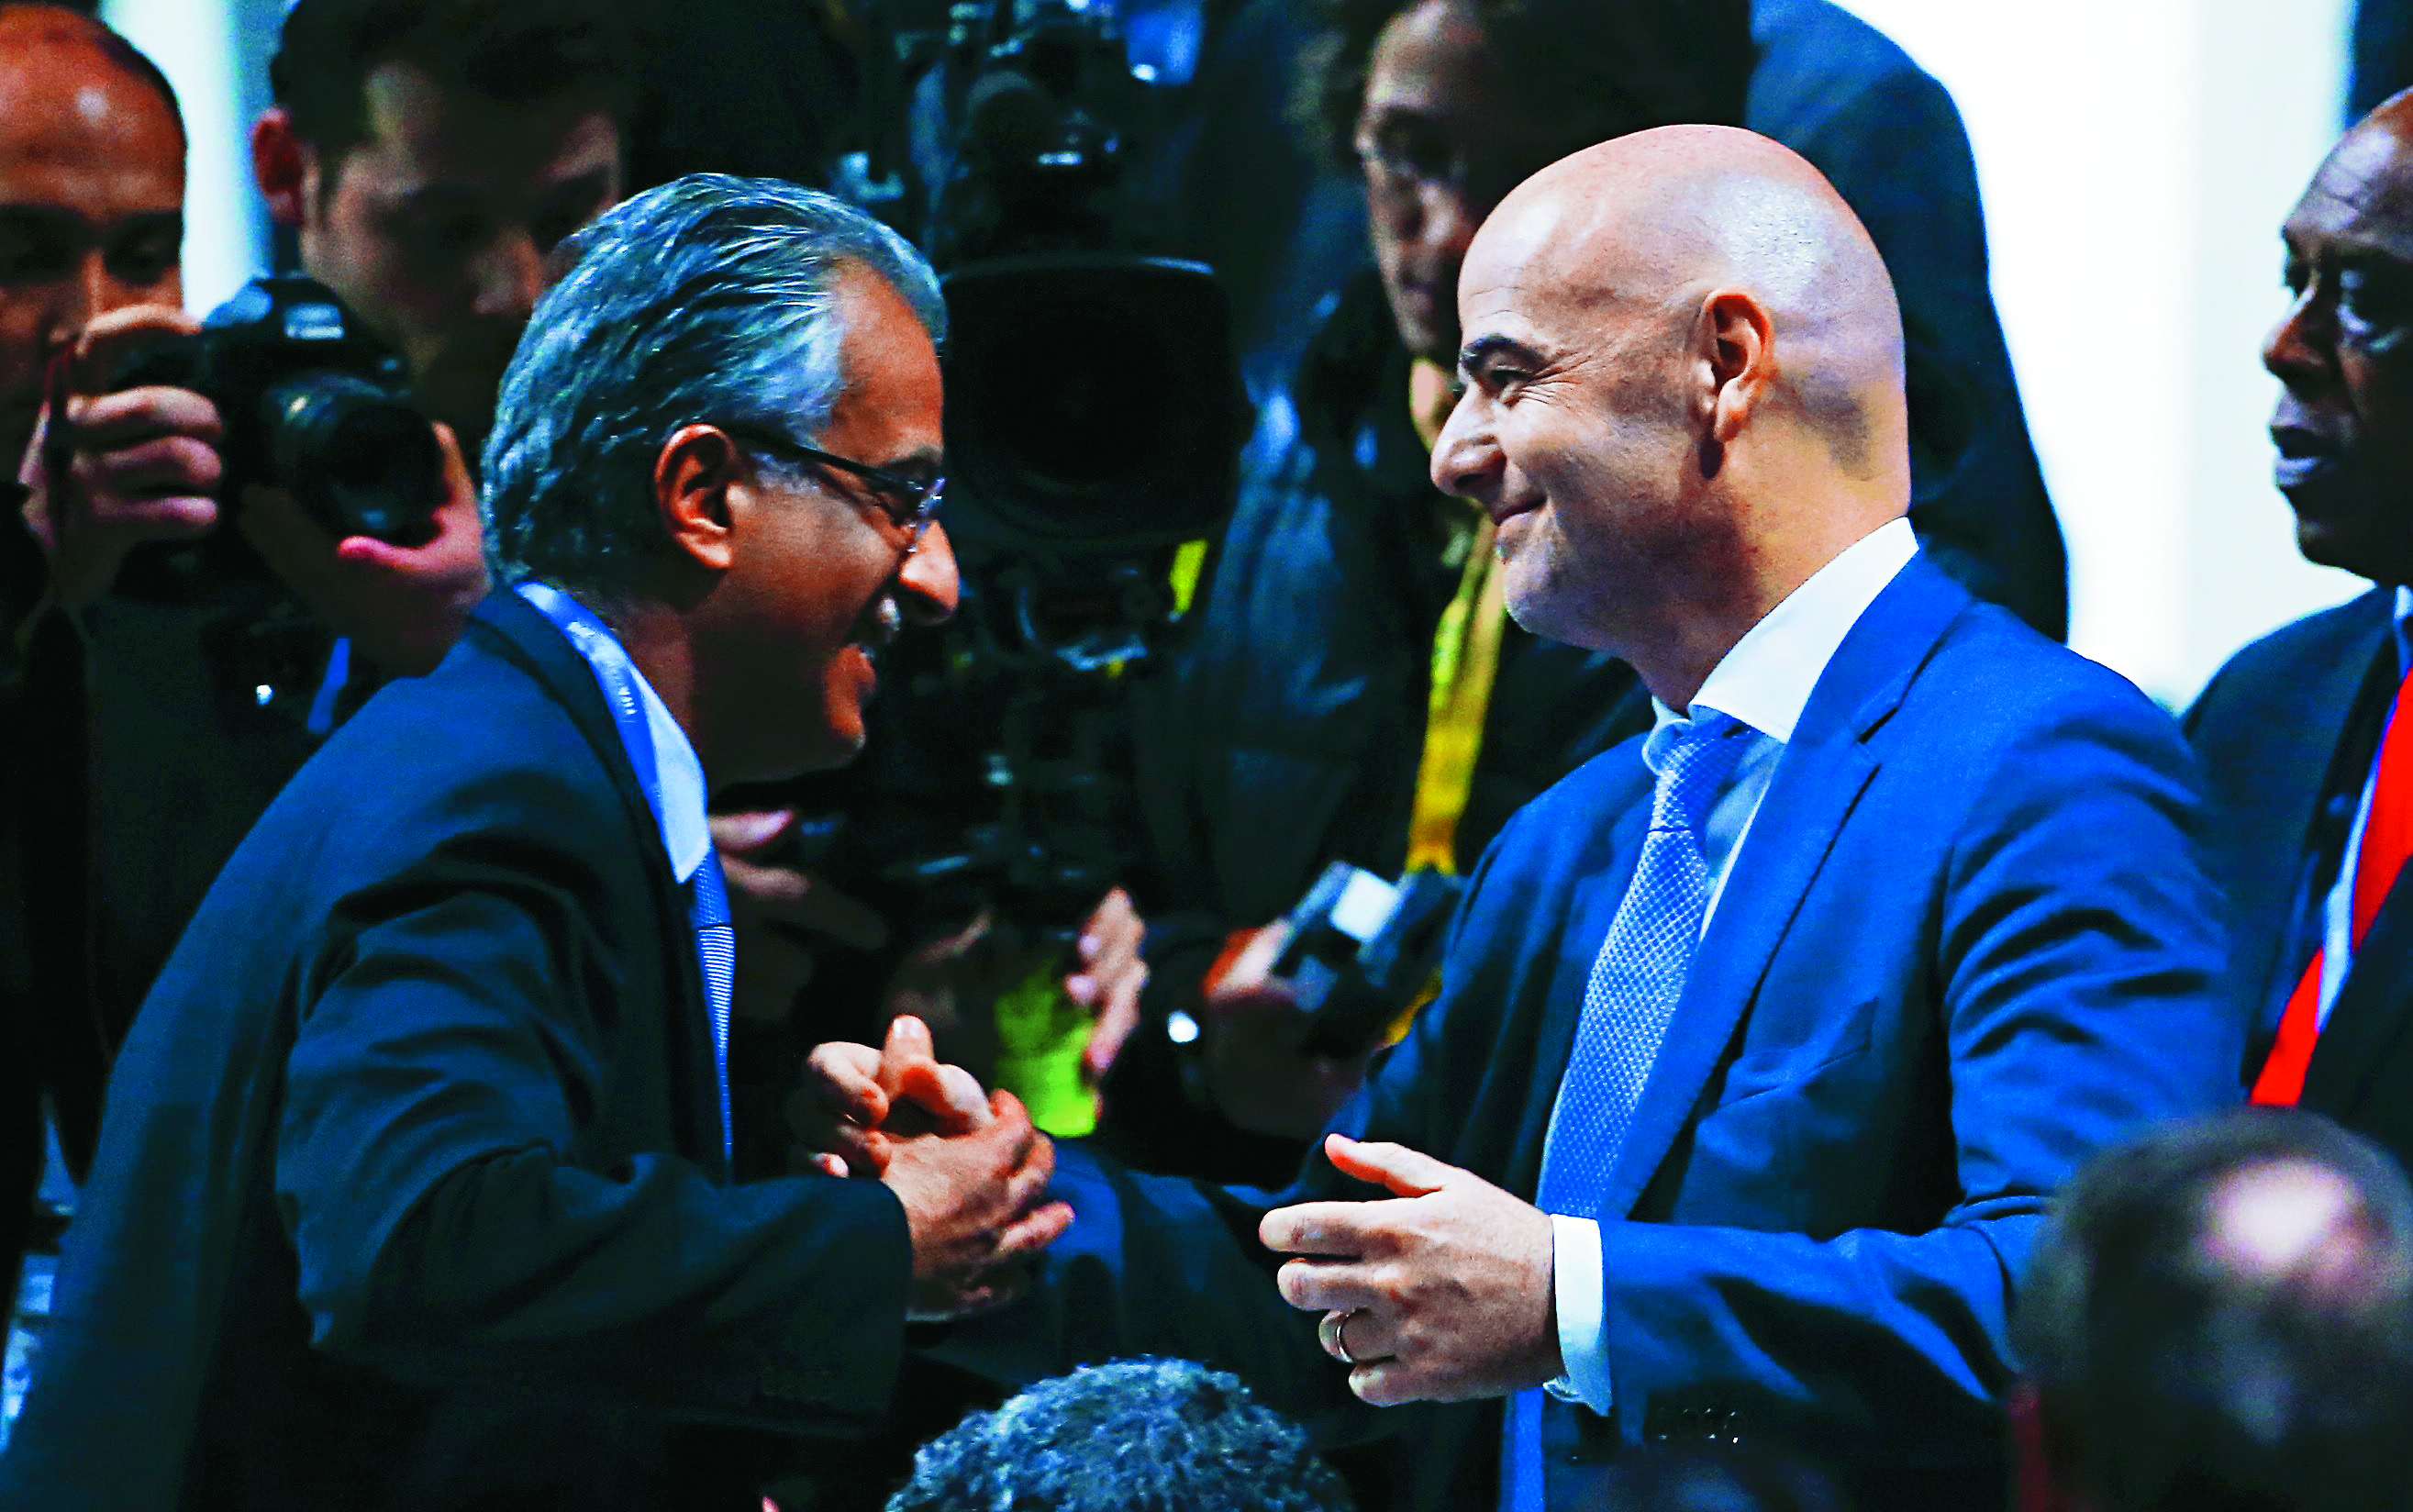 Fifa presidential candidate Sheikh Salman Bin Ebrahim Al-Khalifa of Bahrain congratulates newly elected Fifa president Gianni Infantino after the Swiss’ victory in Zurich. Photo: Reuters